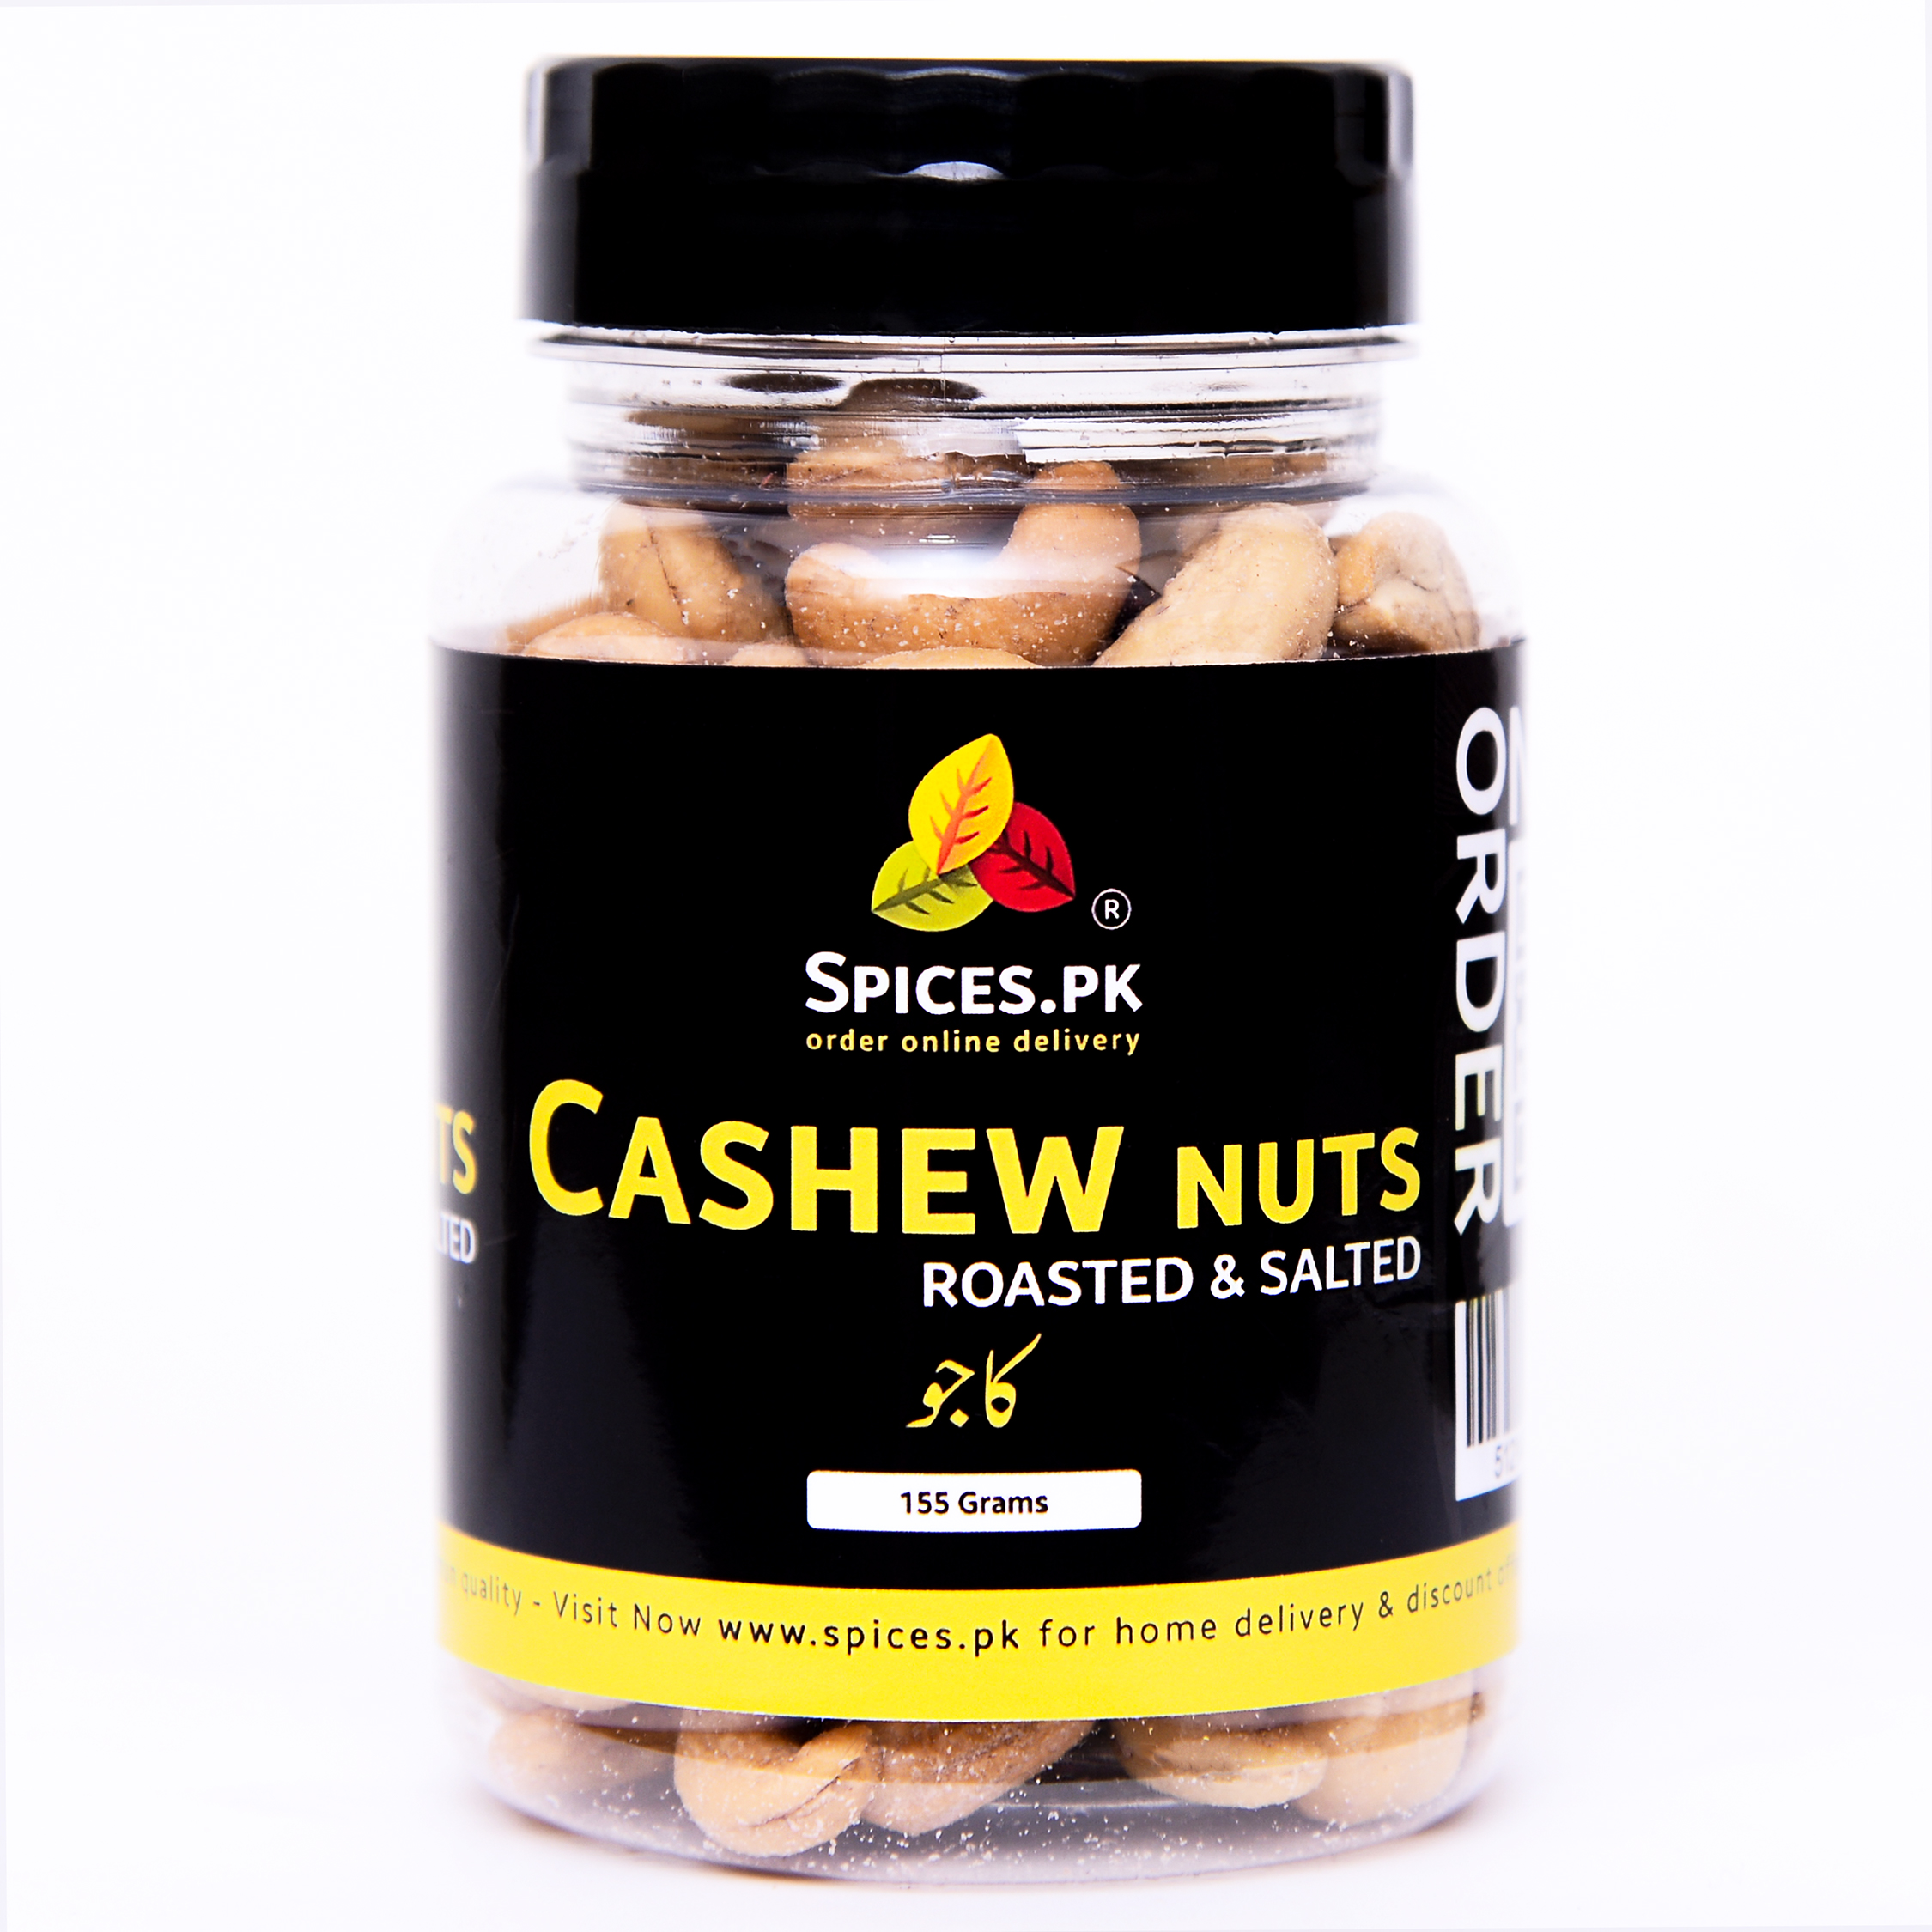 Spices.pk Cashew Nuts ( کاجو ) Roasted & Salty Cashew Nuts / Kaju / Dry Fruit Kaju / Salted Cashew Nuts Wt. 155gm